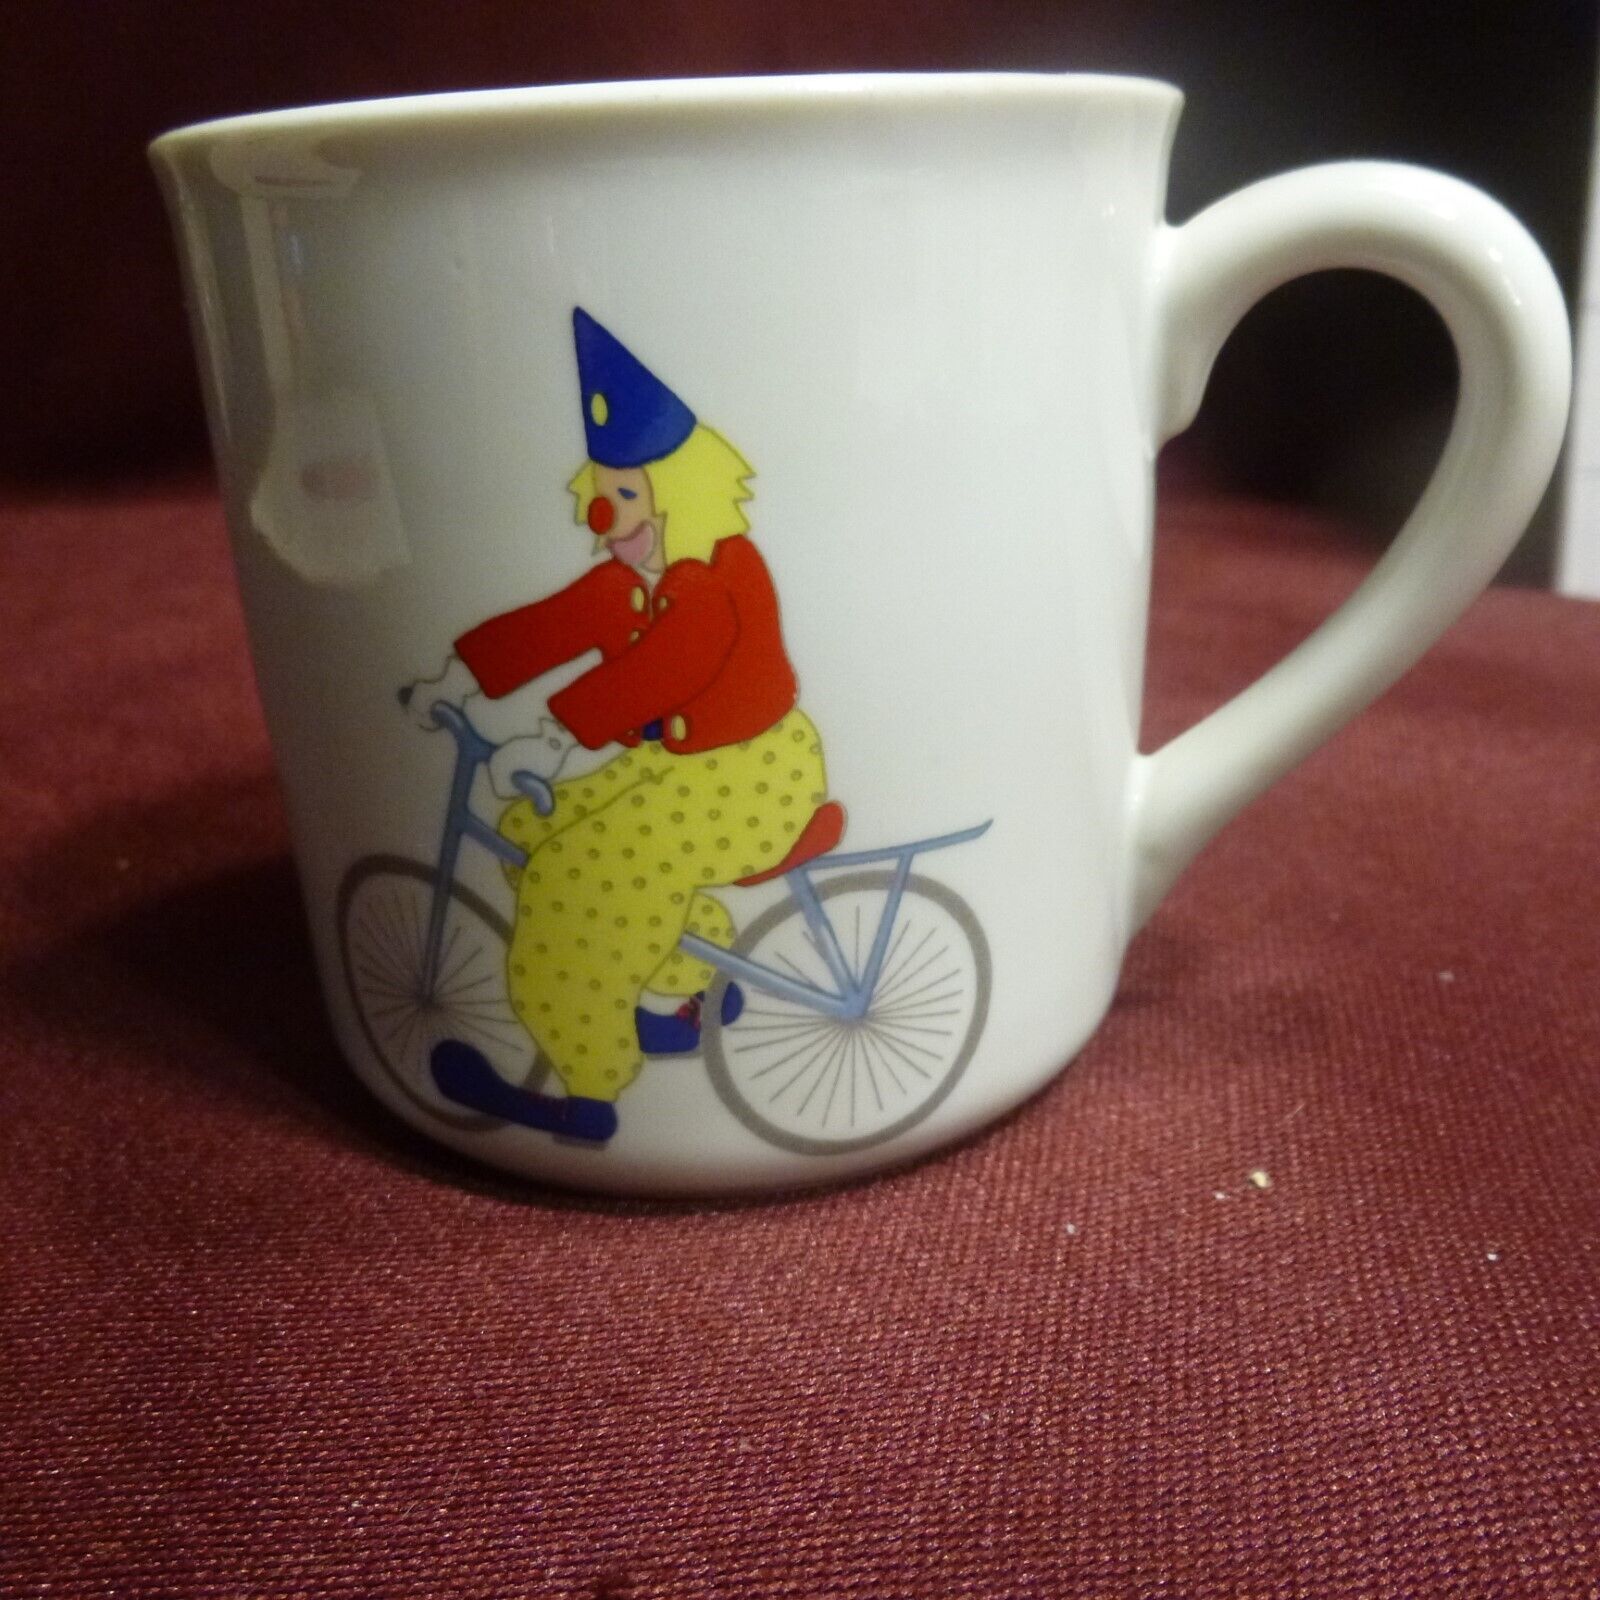 Baby's First Cup / Mug with Clown On Bike - 1988 Porcelana Real Brasil - MINT